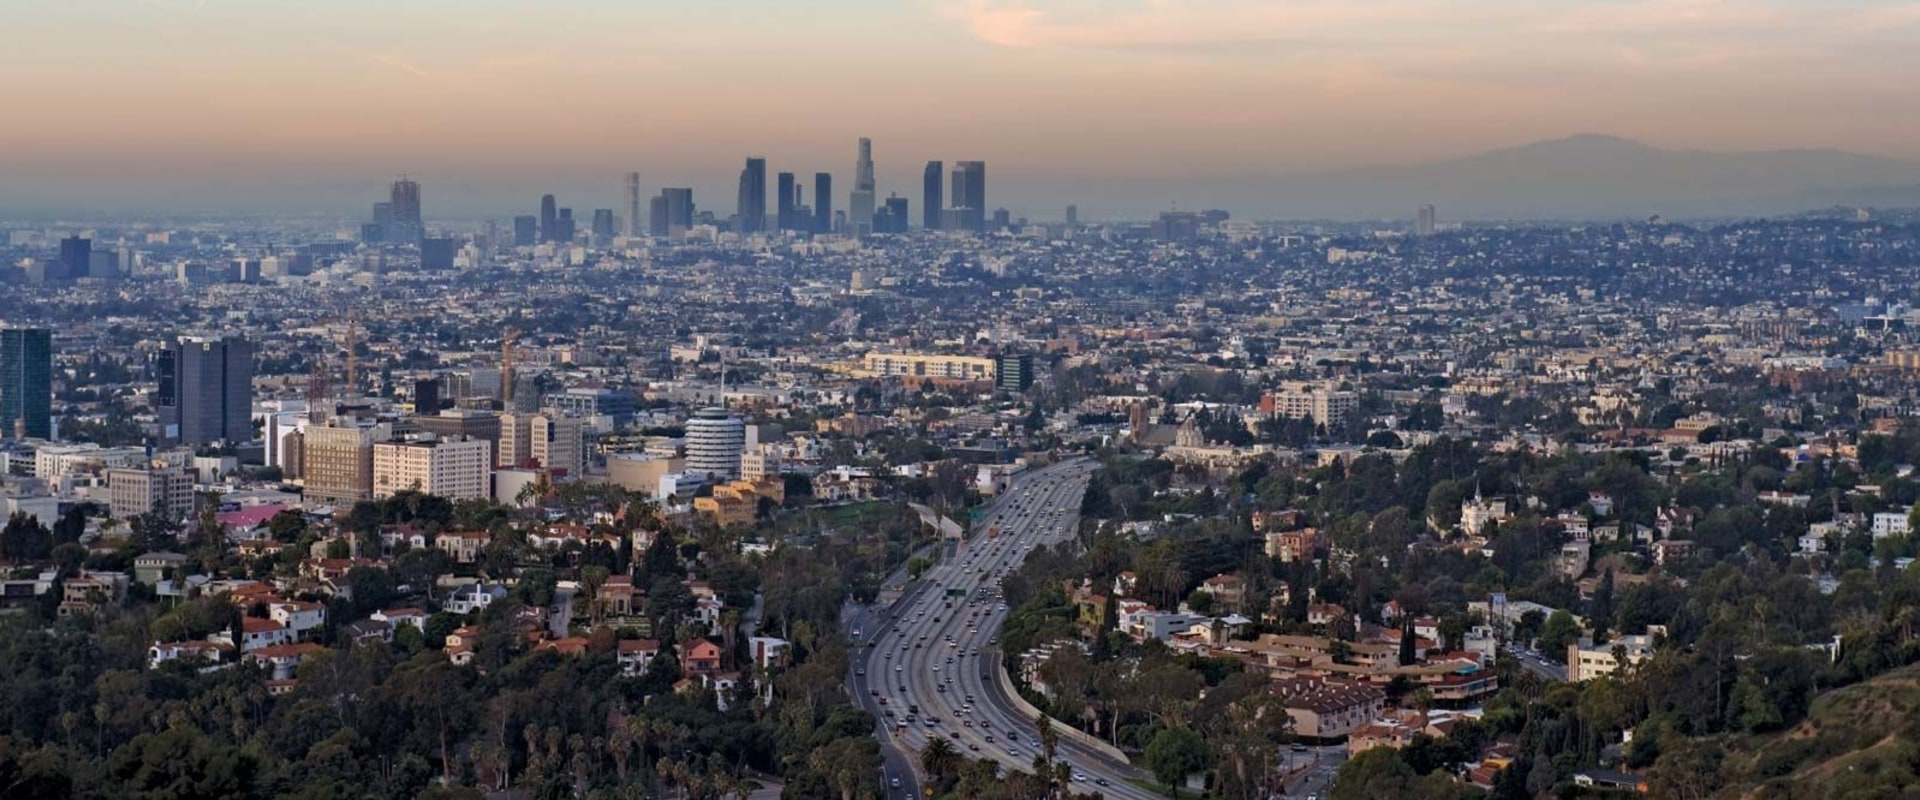 Where is Los Angeles Located: North or South?